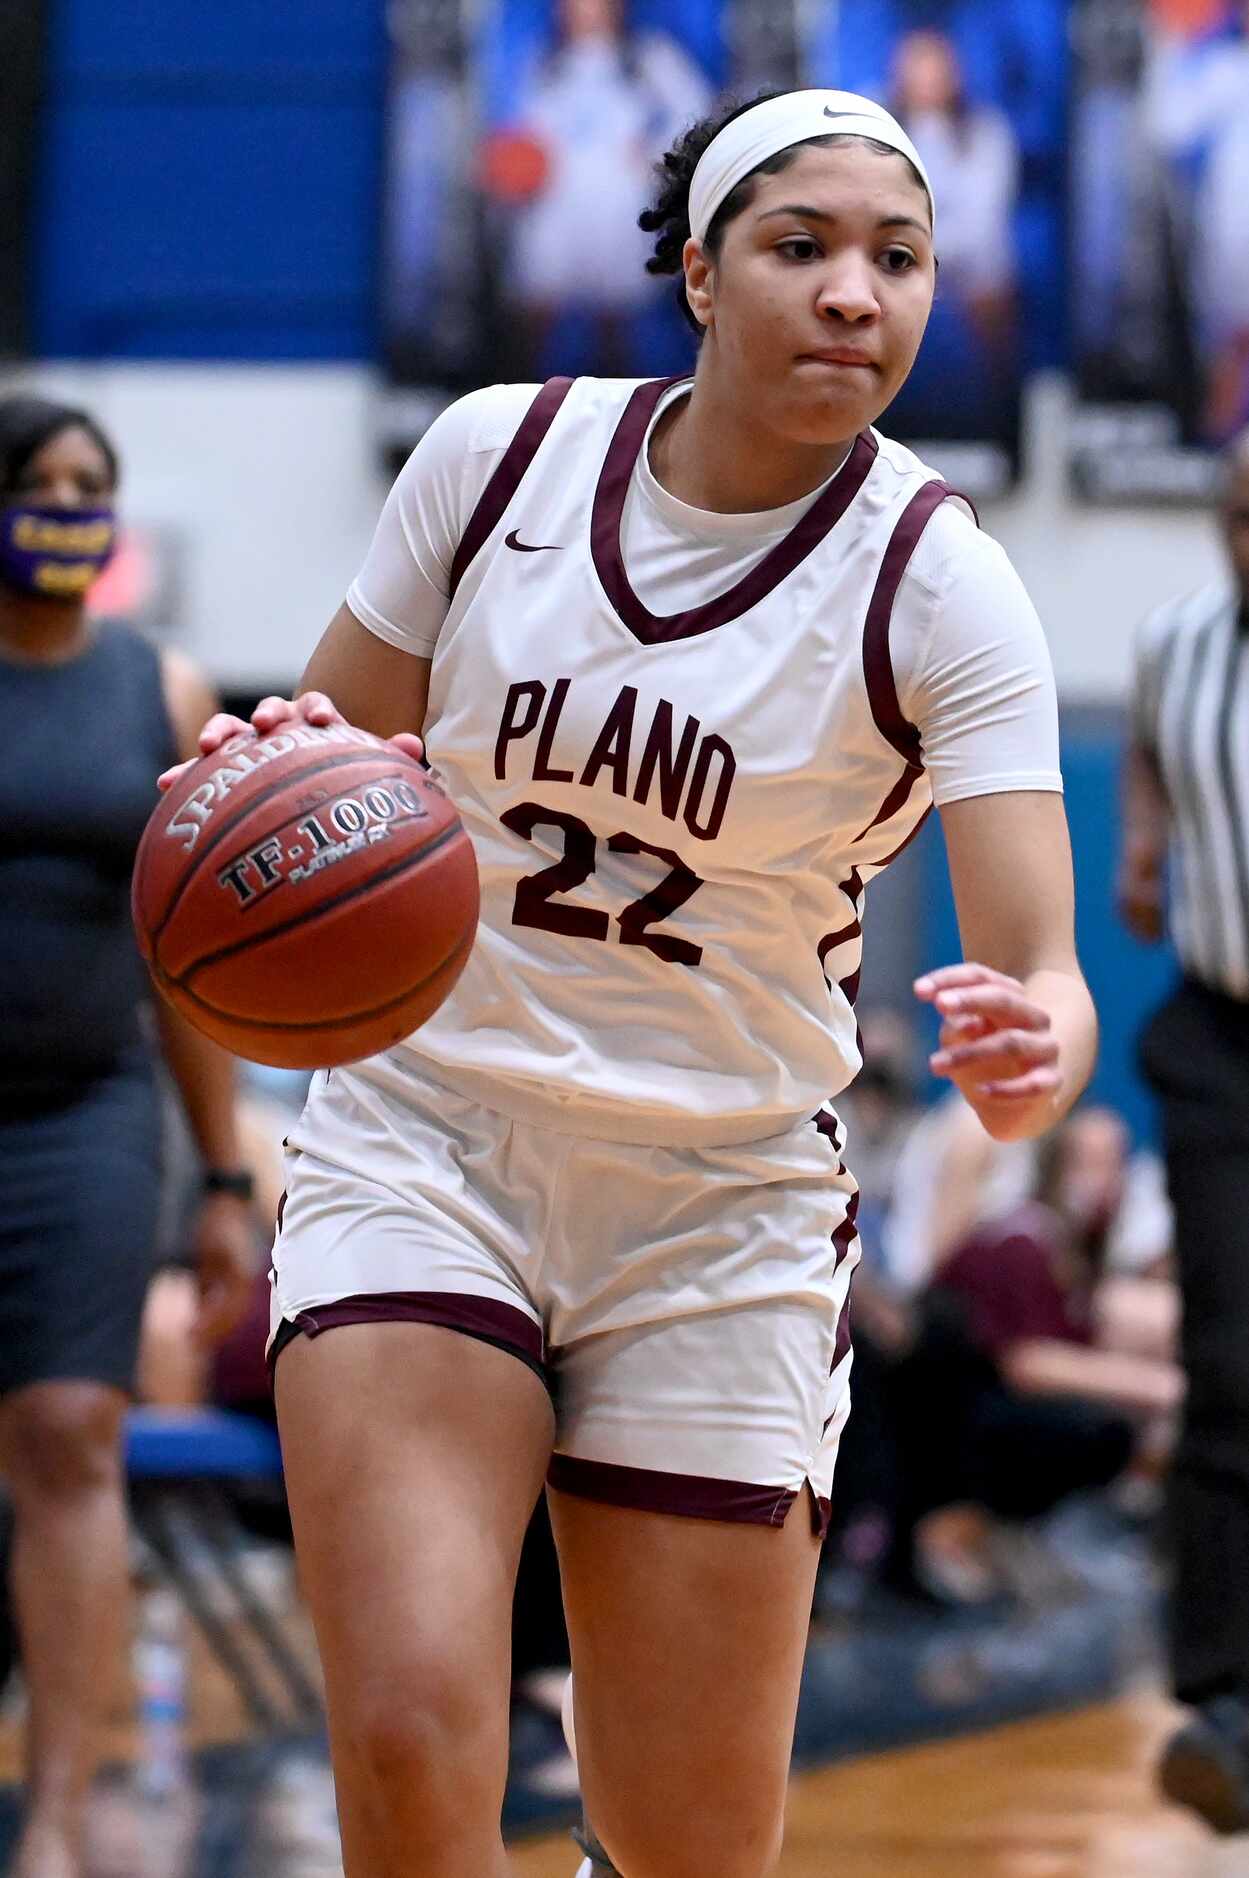 Plano’s Mikayla Eddins dribbles the ball in the first half of a Class 6A girls high school...